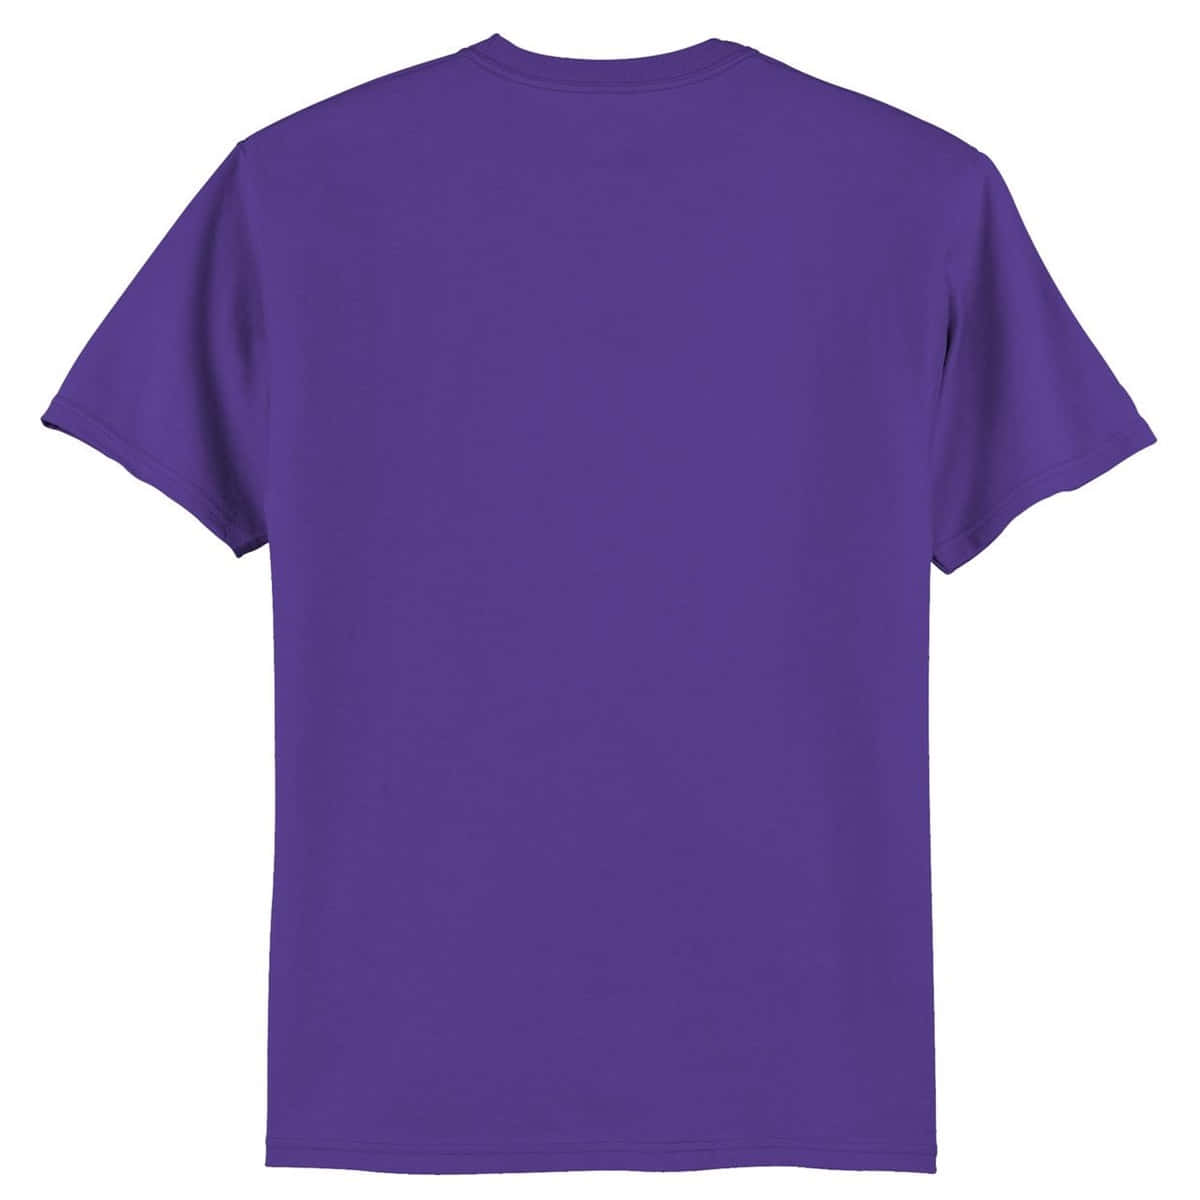 Look great and feel good in a stylish Purple Shirt Wallpaper